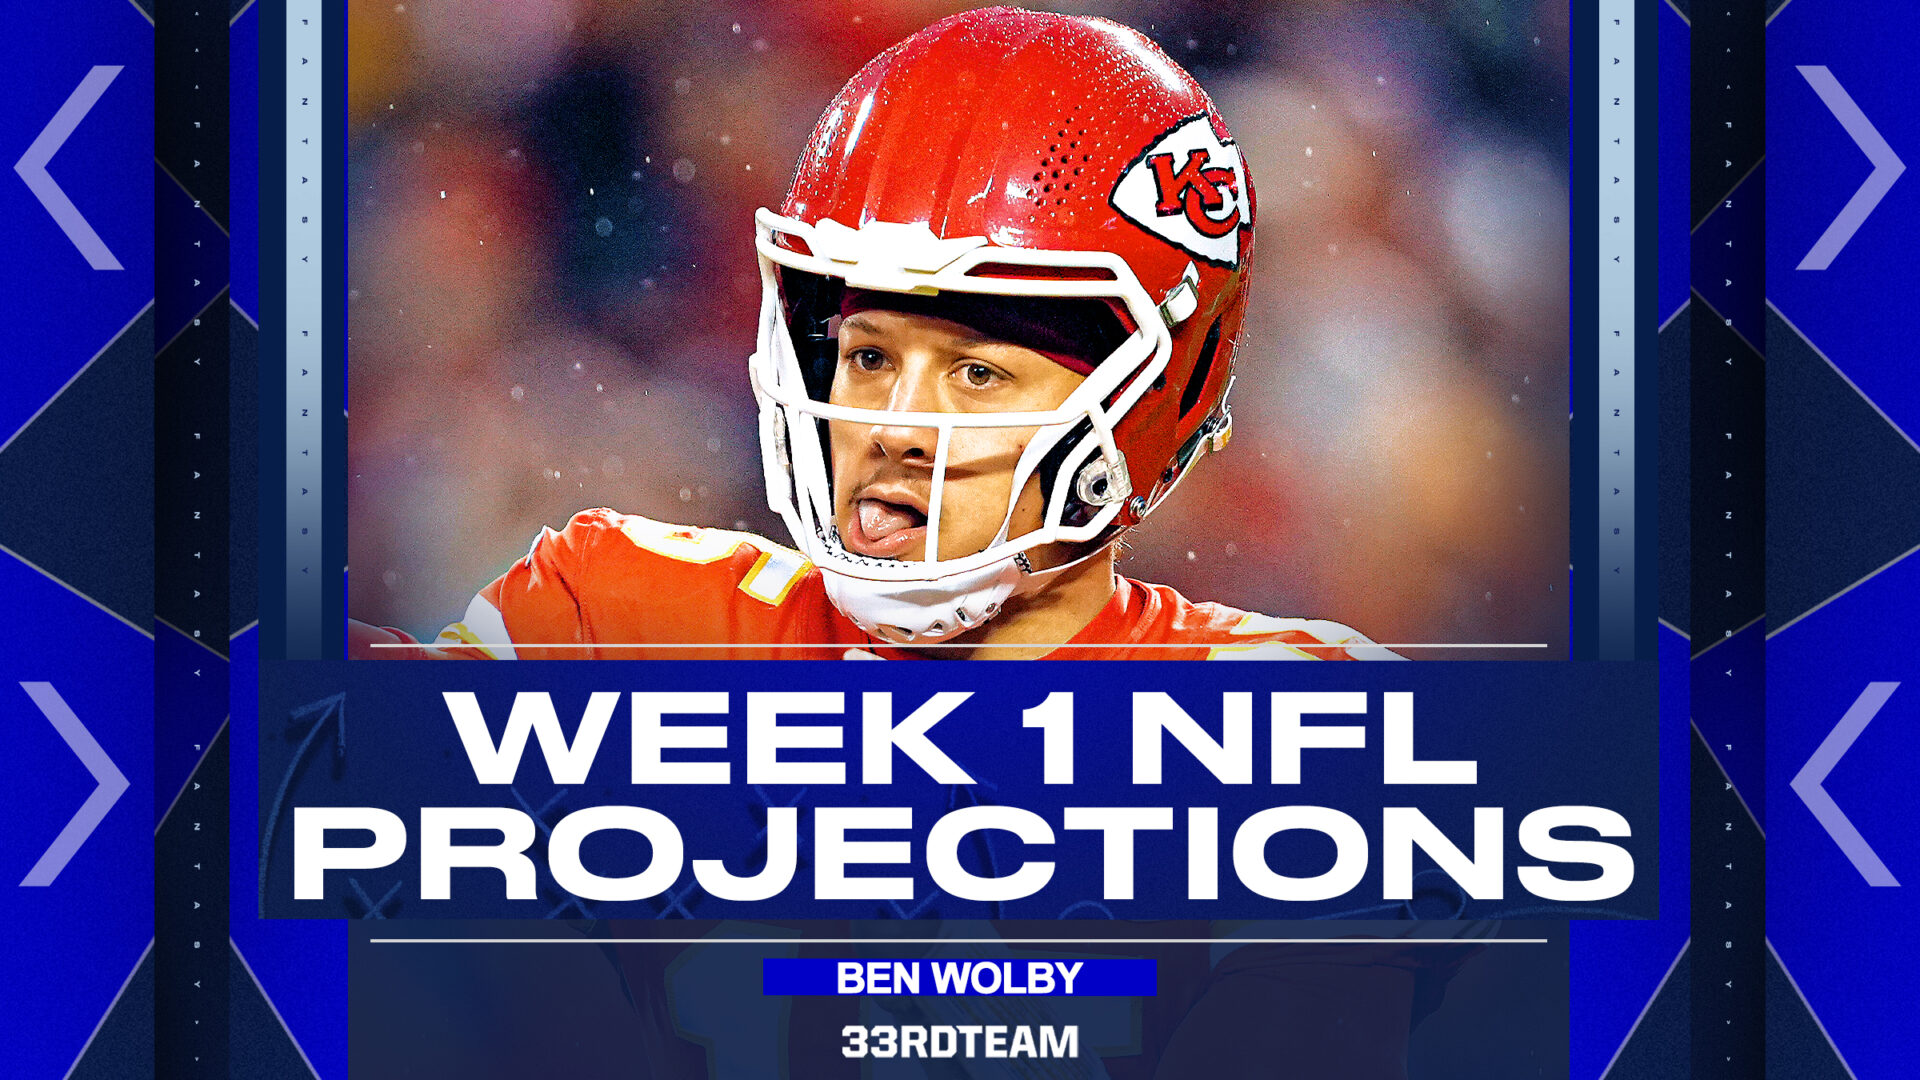 nfl fantasy projections